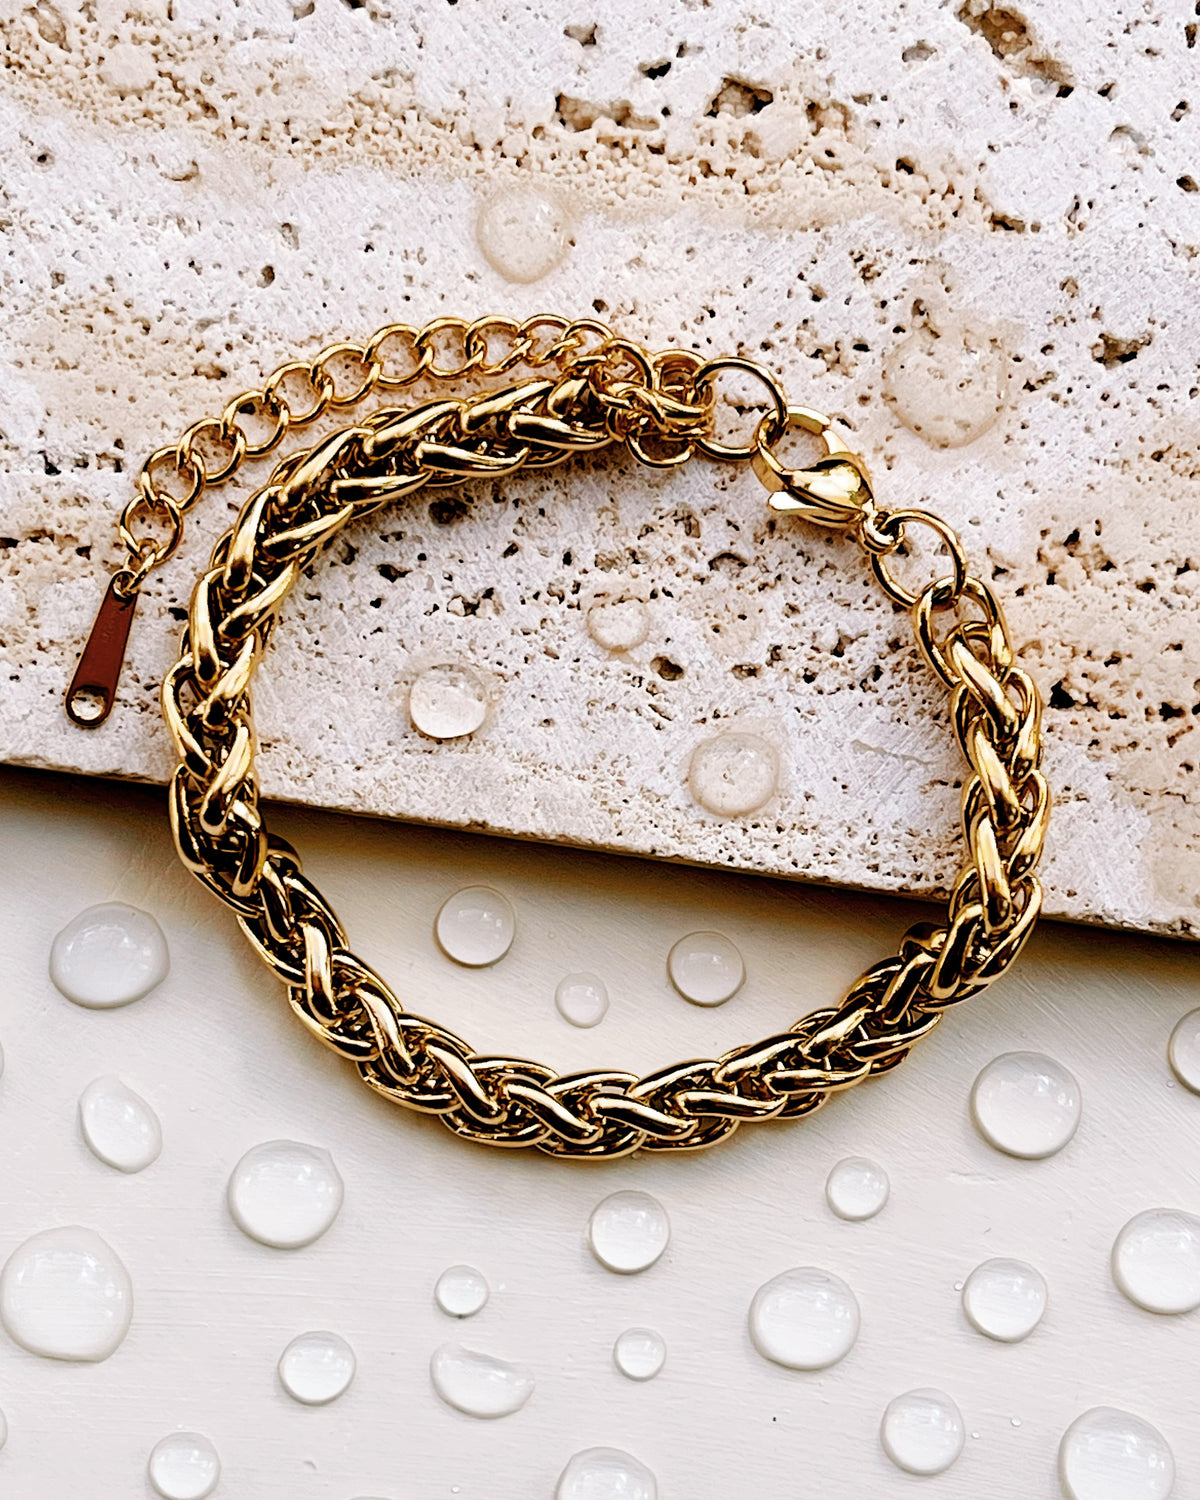 Evelyn Chunky Thick Wheat Chain Design Gold Bracelet